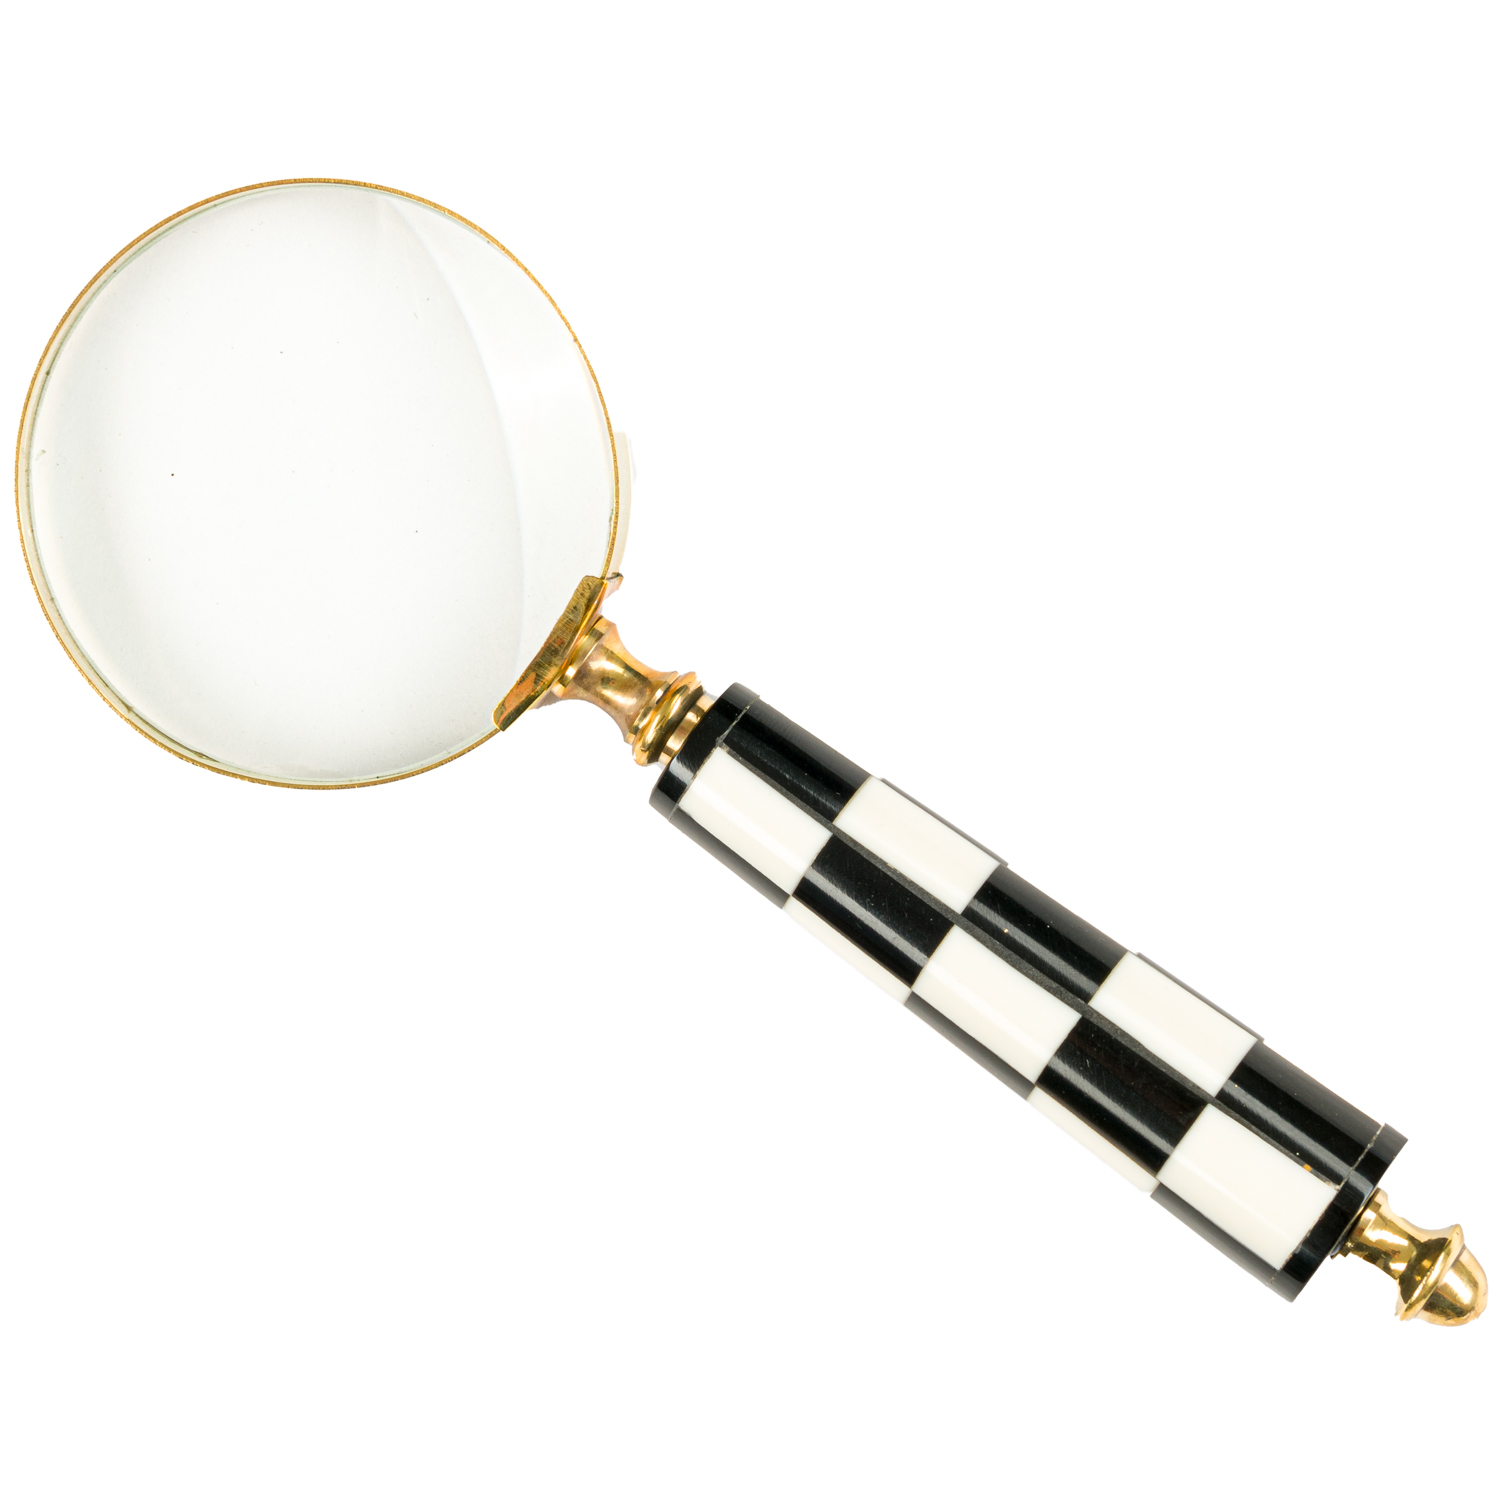 Horn Cheque Magnifying Glass - Image 1